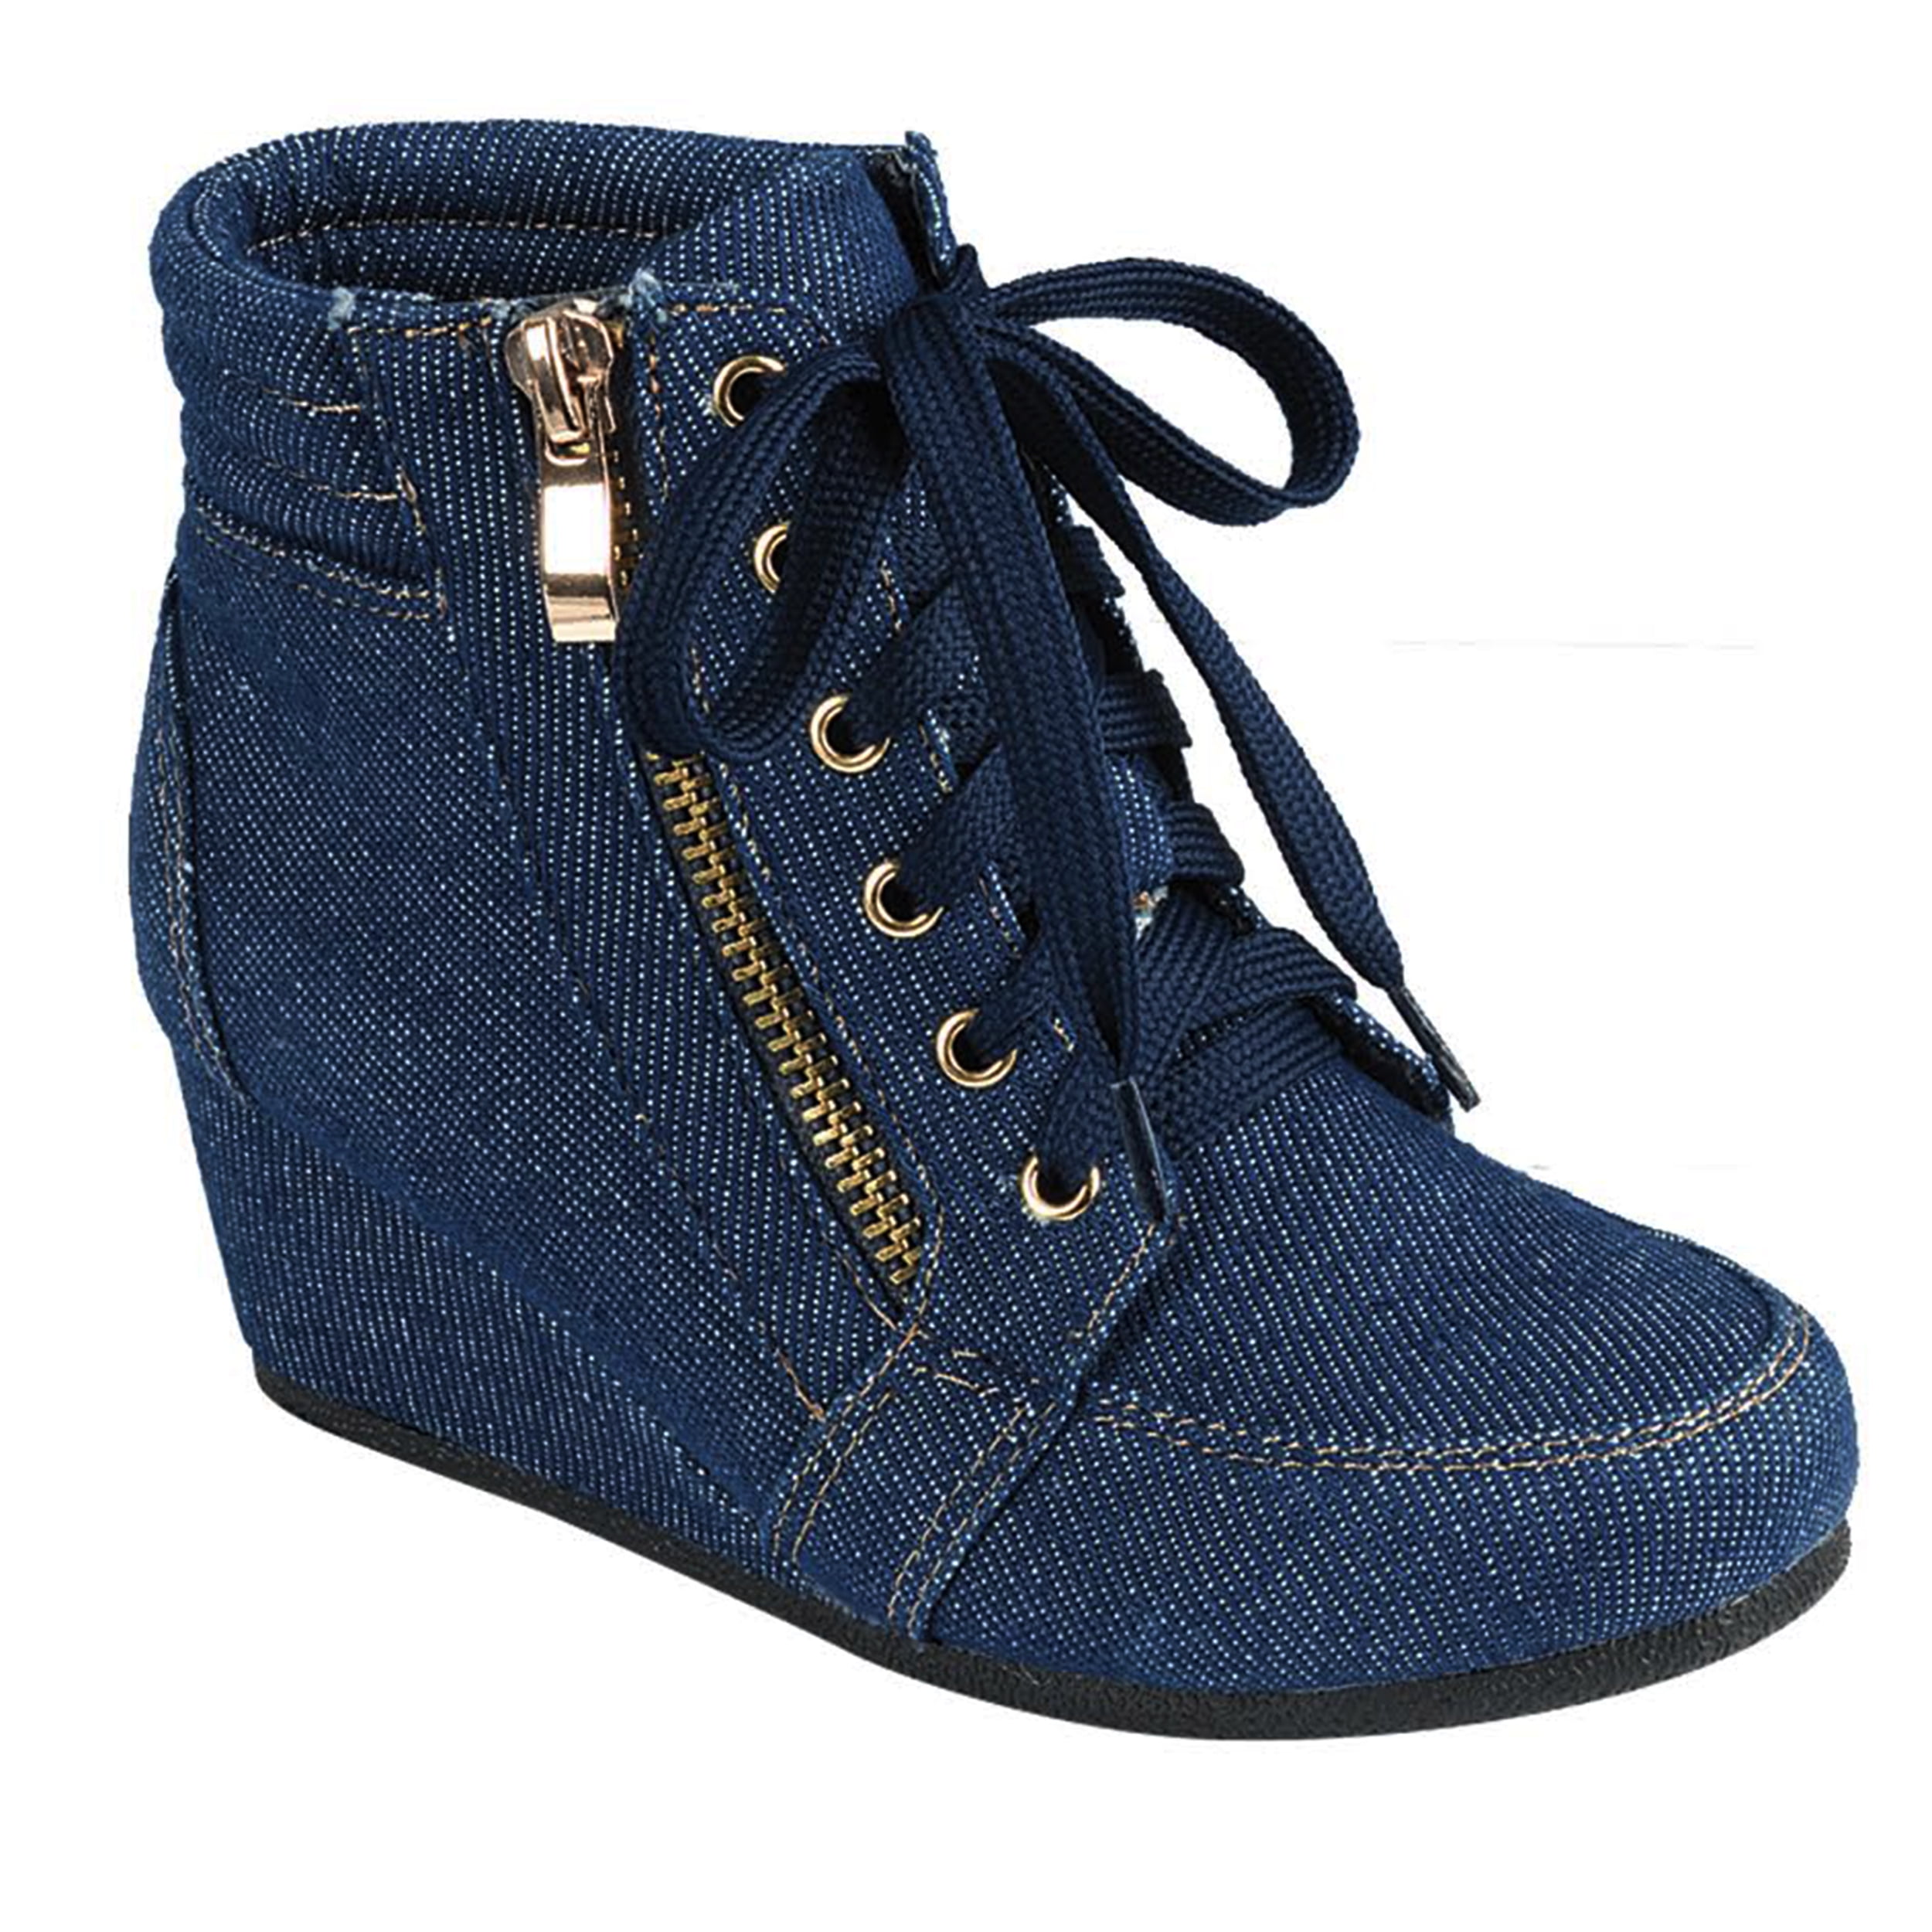 High Top Wedge Sneakers Lace Up Ankle Bootie - Walmart.com